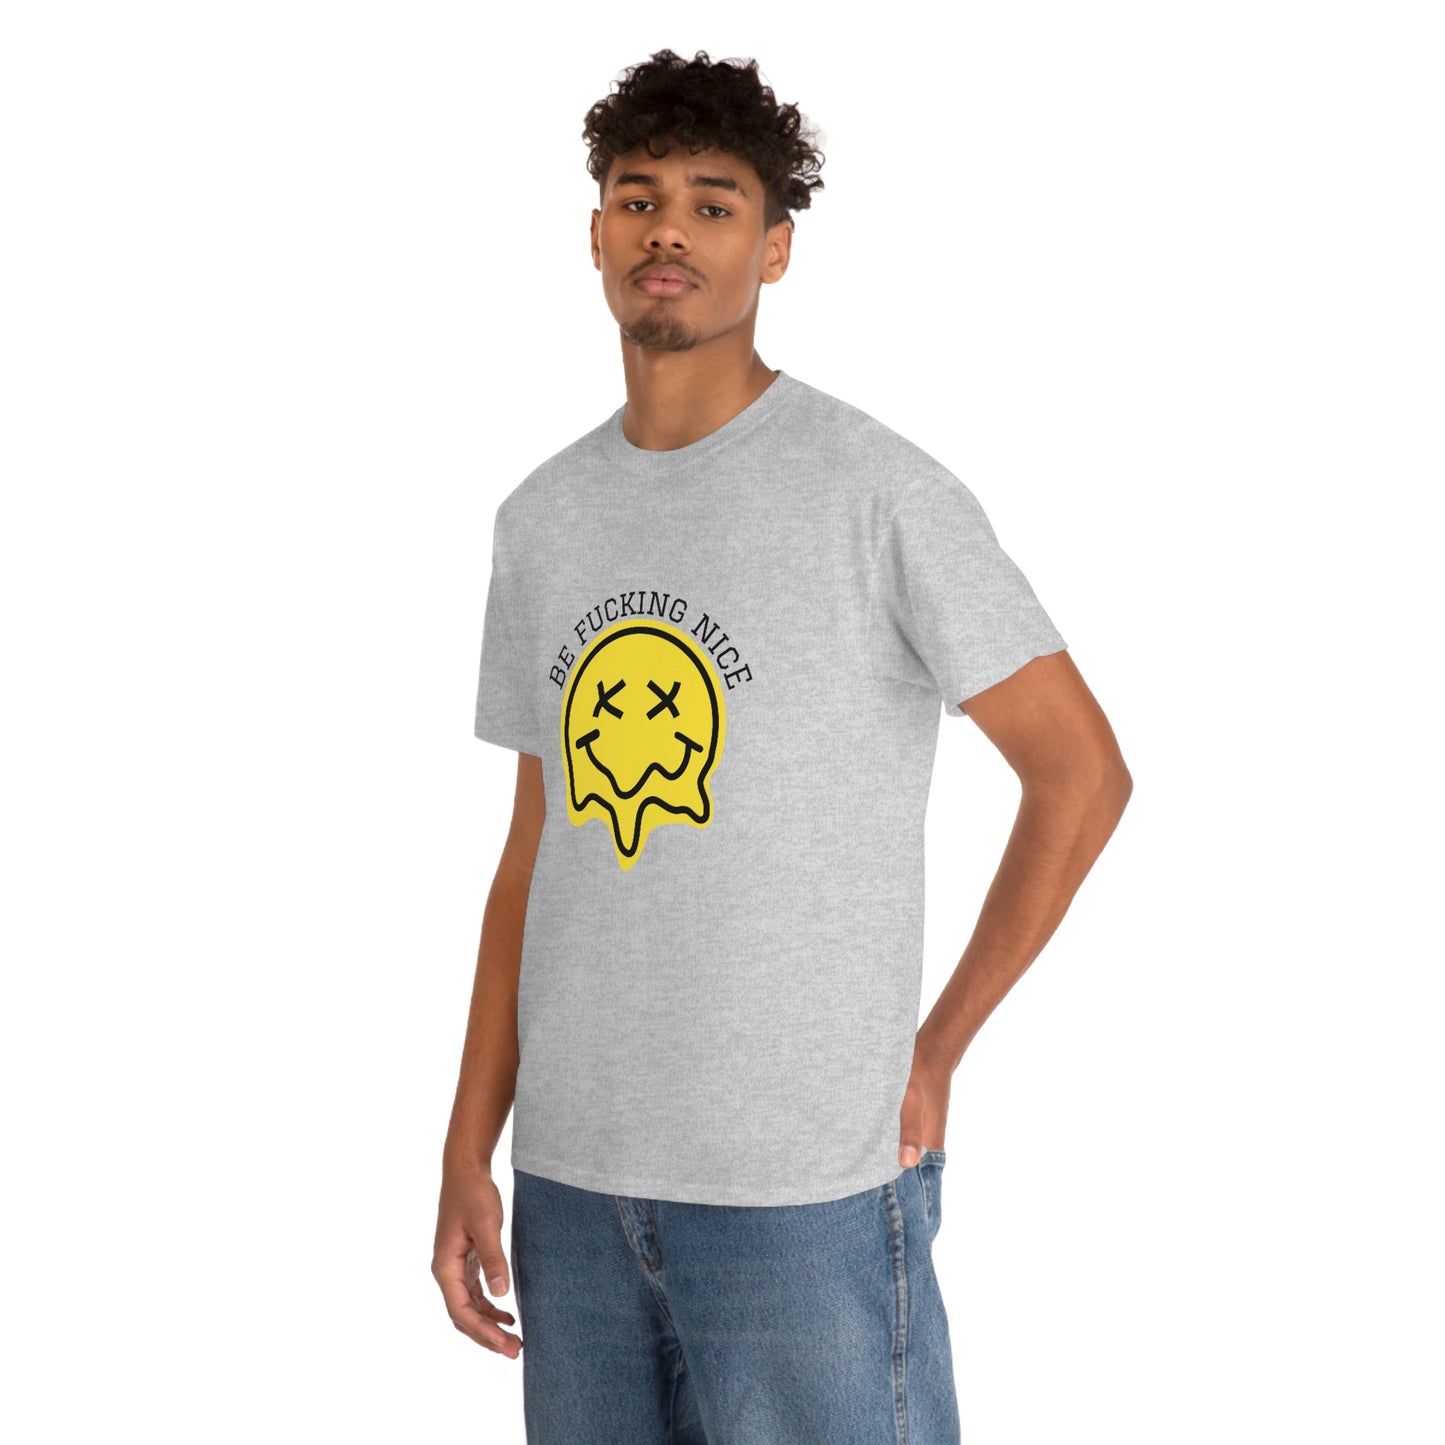 "Be fucking nice. We're all doing our best", Tee